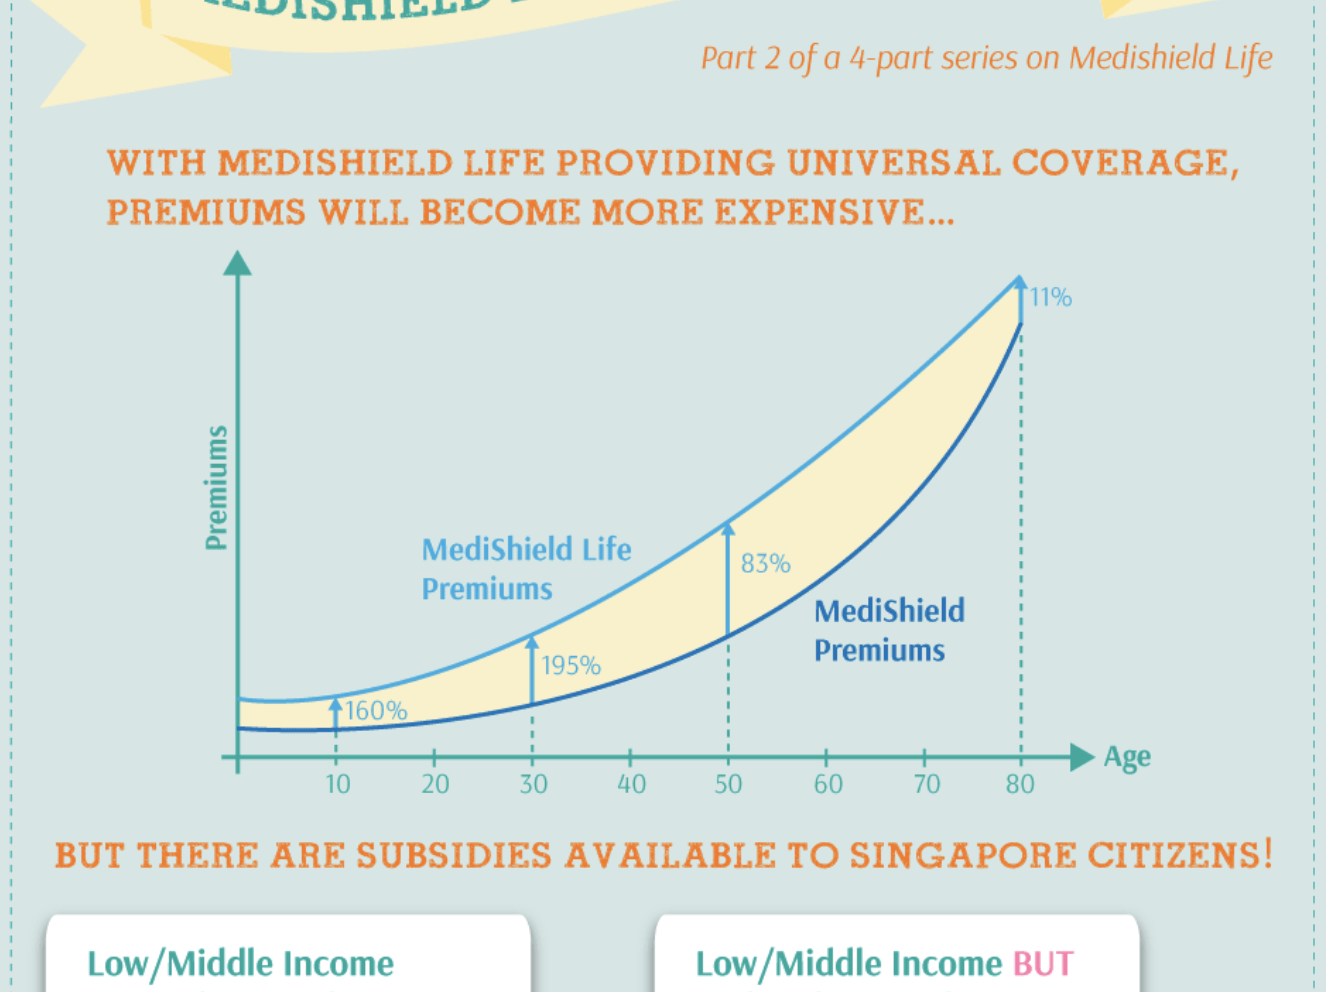 financial support to make medishield life more affordable